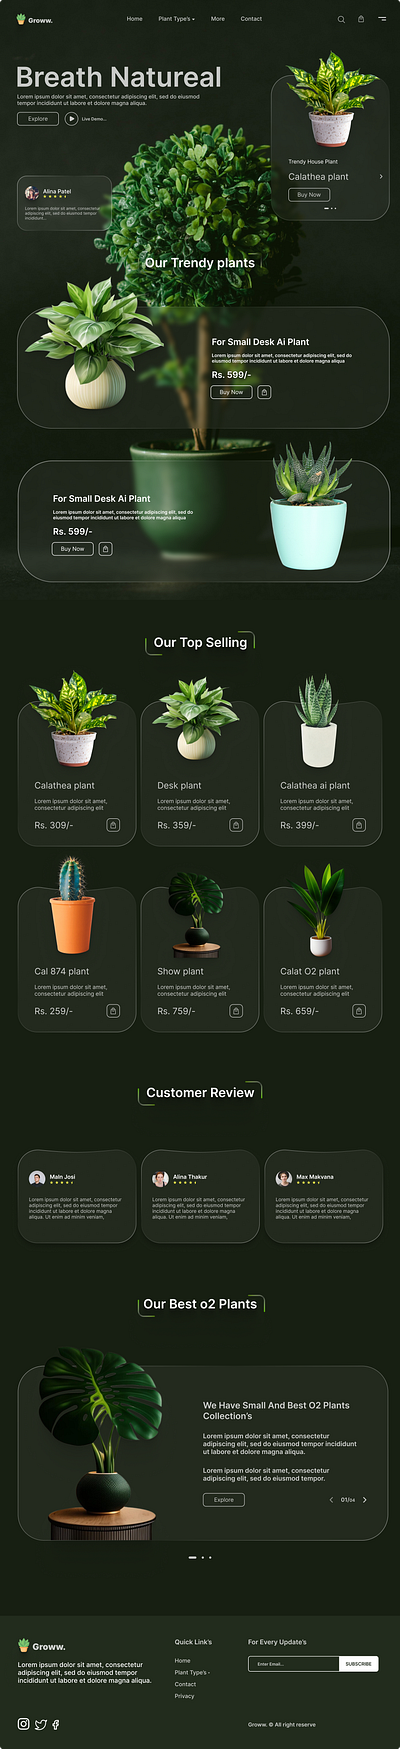 Groww. - An E-commerce website for plants with green theme 3d animation customer reviews e commerce ecommerce website figma figma design green theme groww landing page nature online store plants product listing ui uiux web design